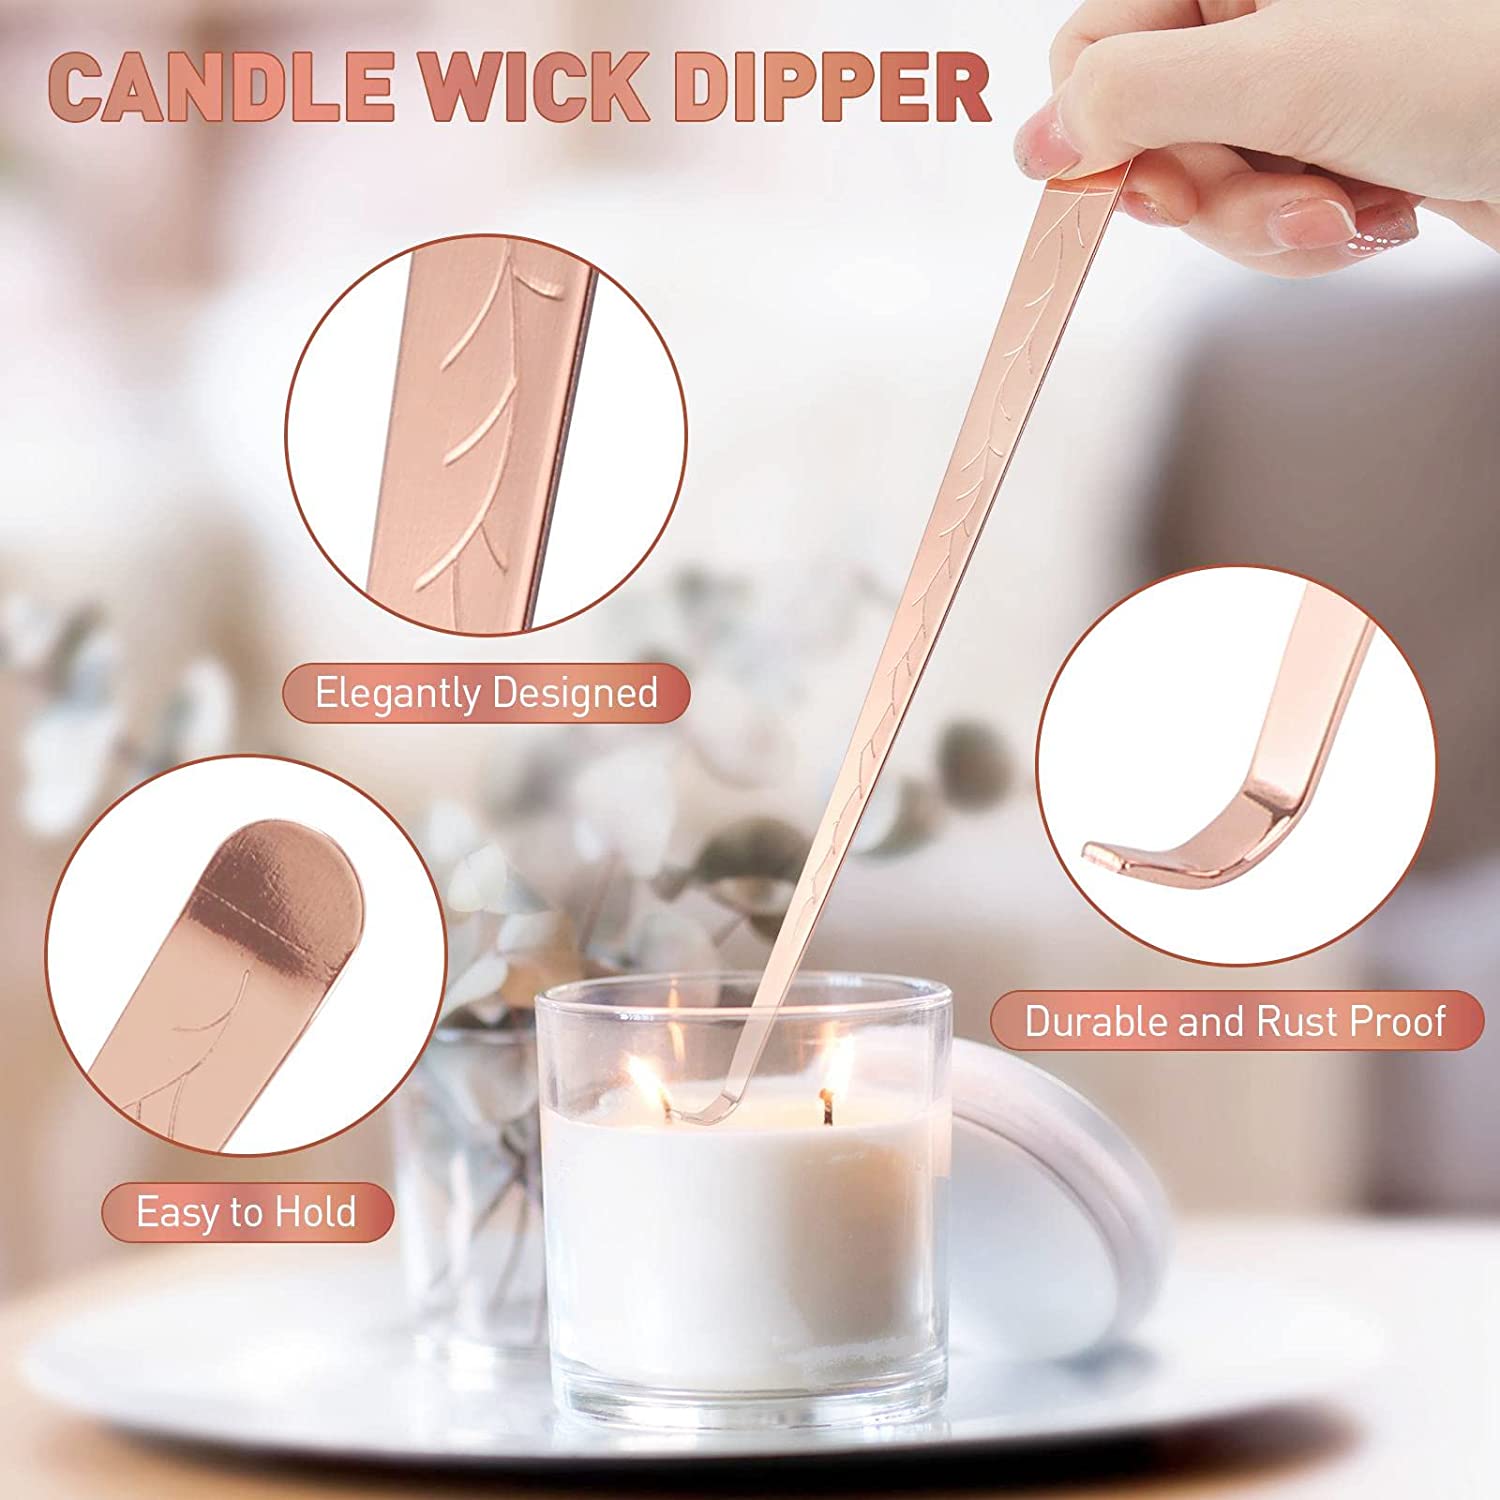 Candle Accessory Set ( Rose Gold ) - Candle Wick Trimmer, Candle Snuffer, and Candle Wick Dipper